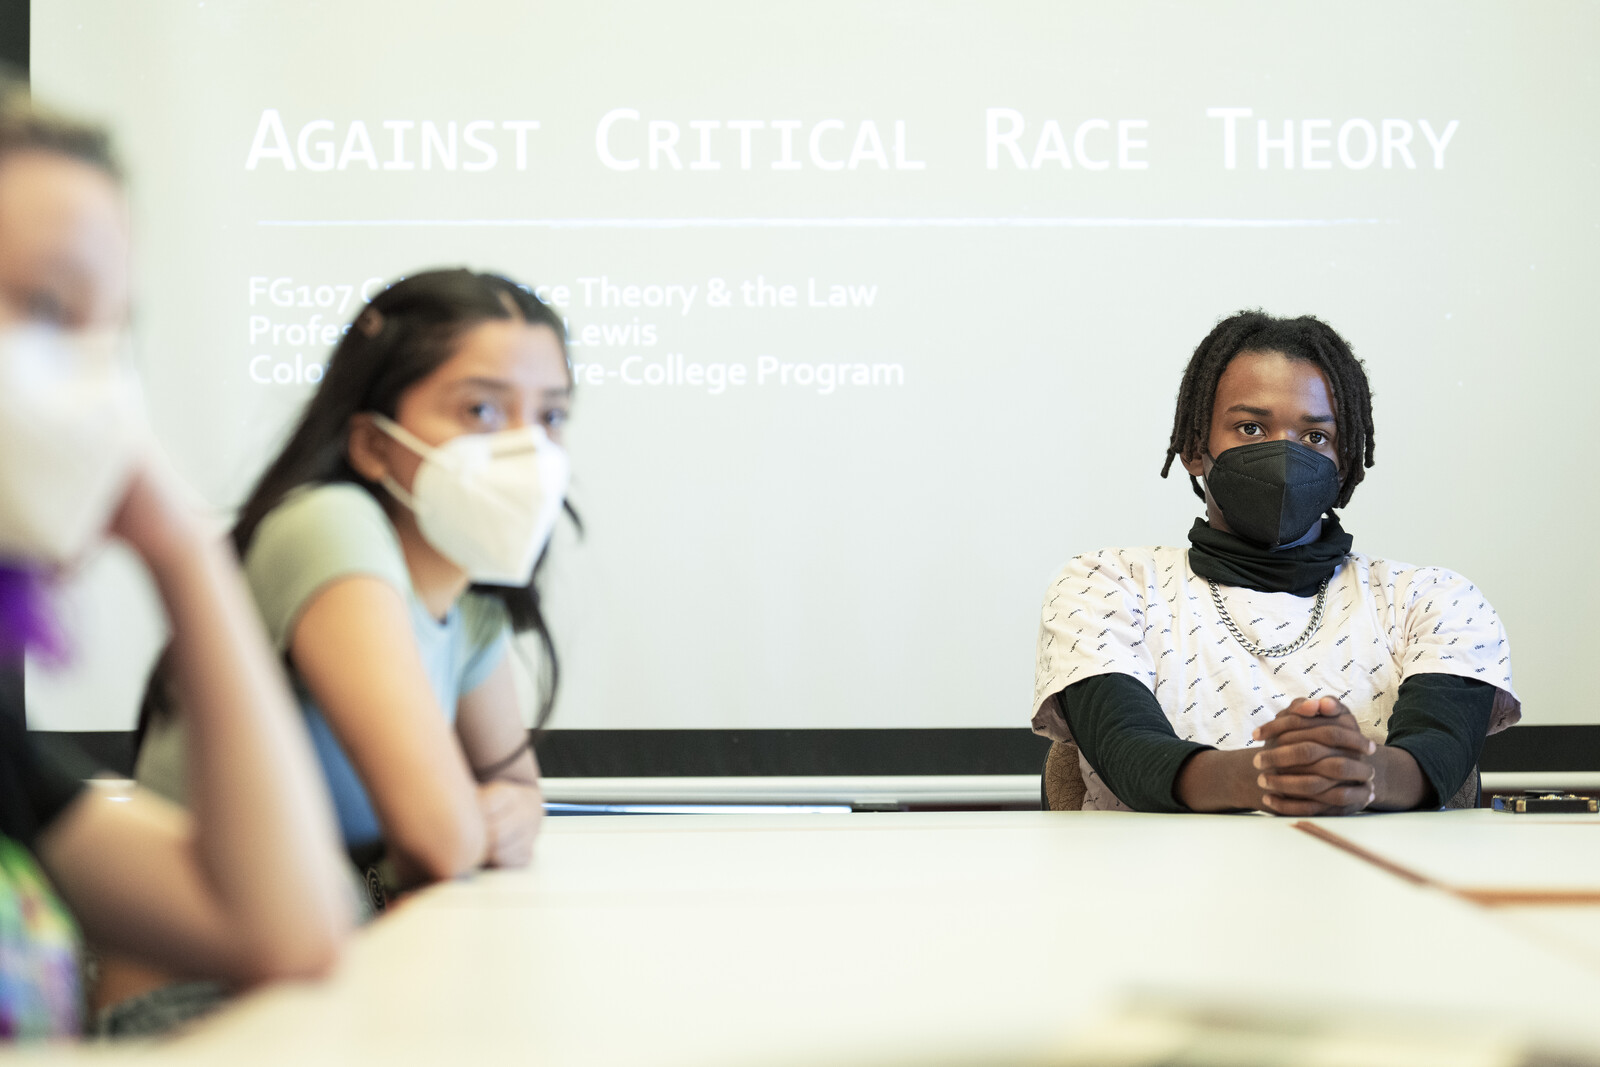 Clockwise from left: Katana “Kat” Shrader (she/her(s)/they/them); Mireya Lima Vasquez (she/her(s)); and Antonio “Junior” Lewis, Jr. (he/him) during Heidi Lewis’s Pre-College course FG 107: Critical Race Theory and the Law class on Wednesday, 7/27/22. Photo by Lonnie Timmons III / Colorado College.